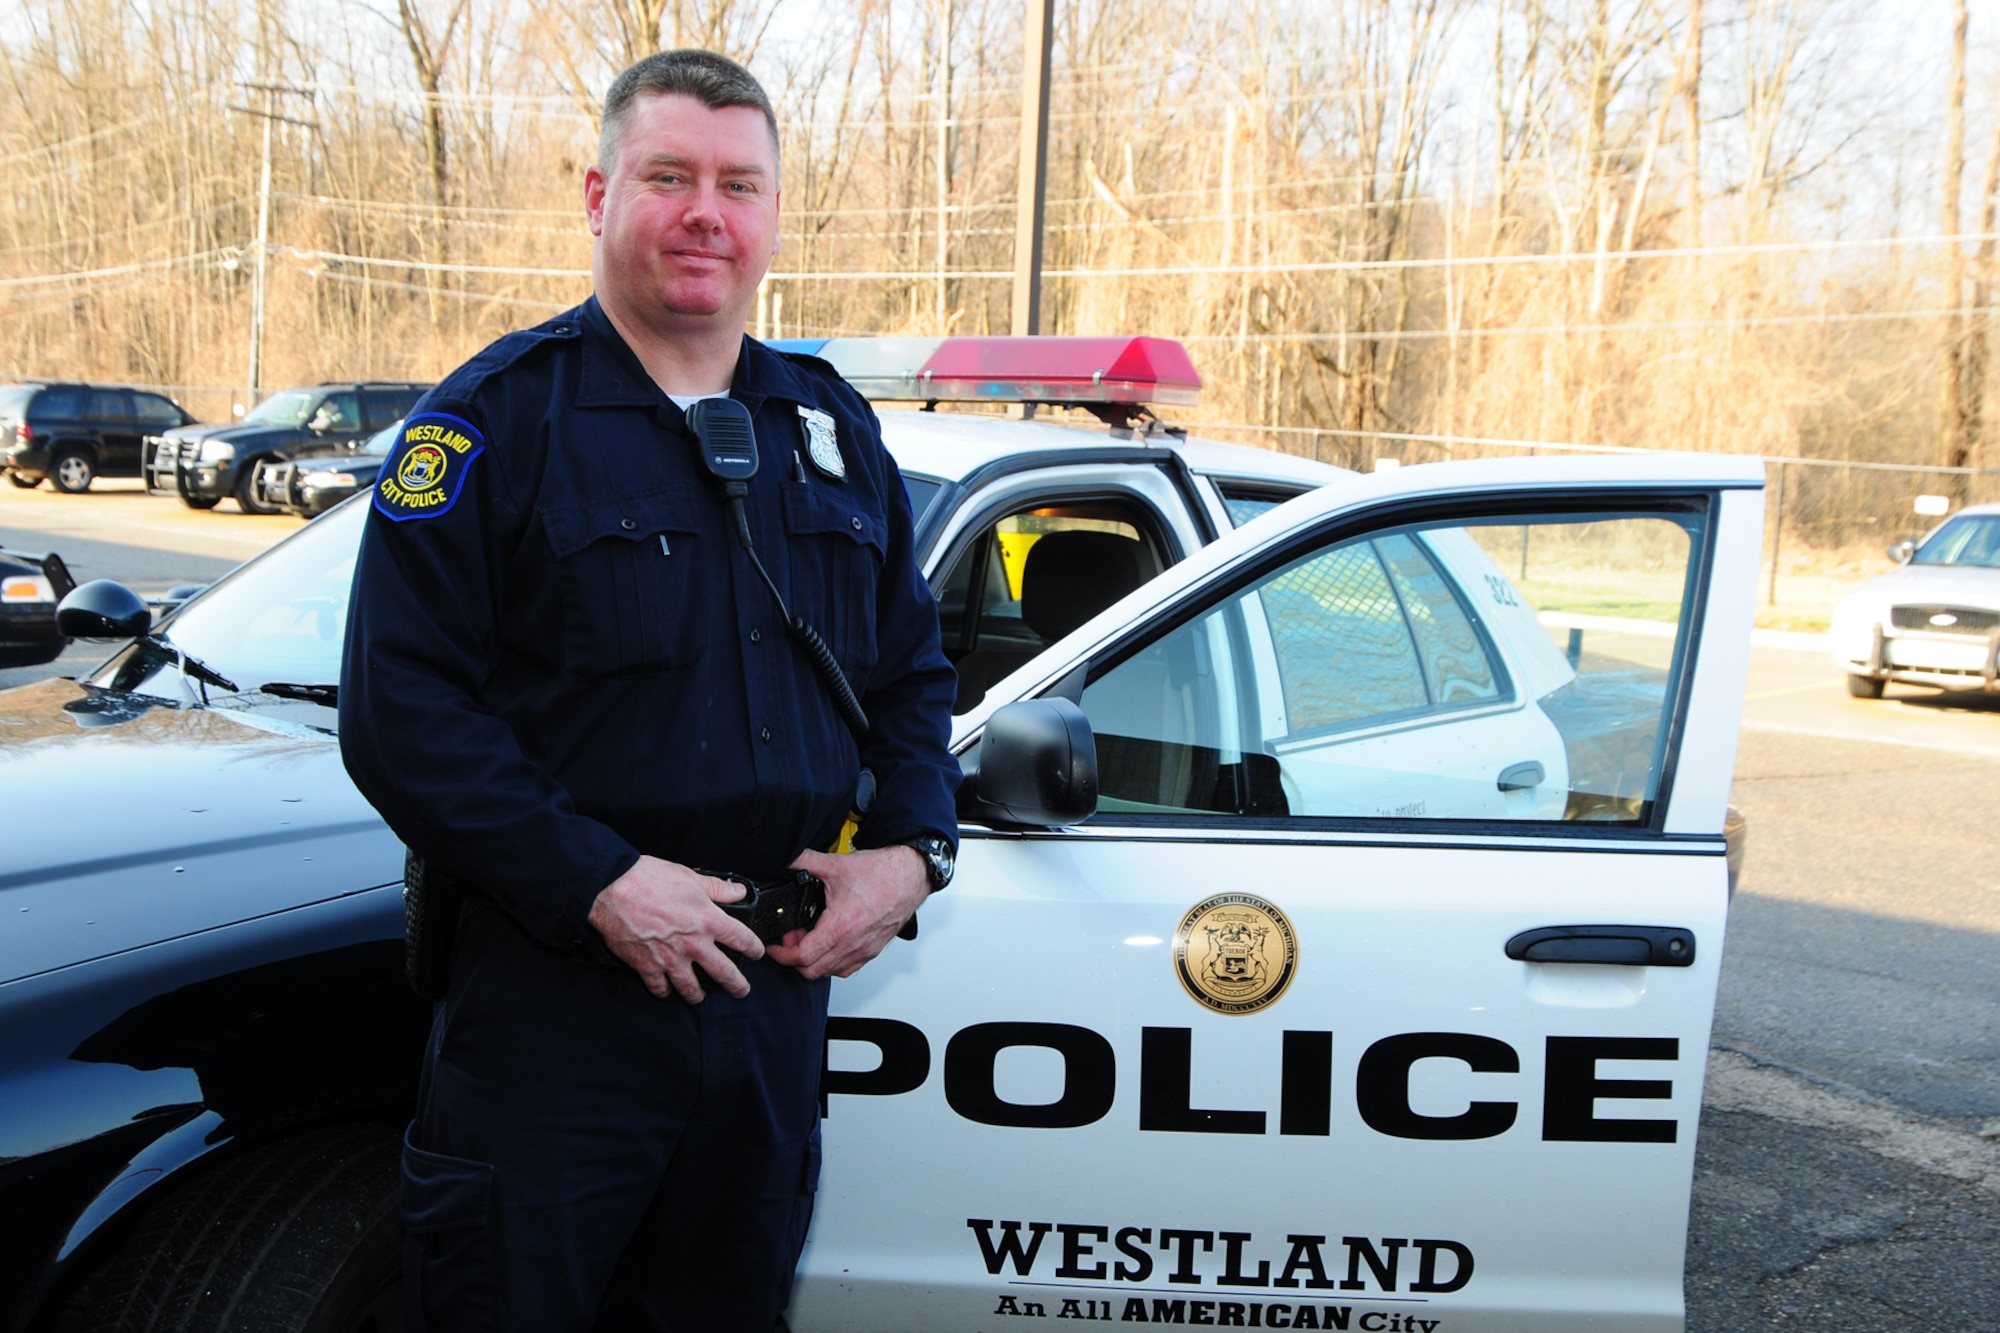 Westland, Mich., Police Officer Tim Horvath prepares to begin his patrol duties in the suburban Detroit community. Horvath is also a senior master sergeant in the Michigan Air National Guard, serving with the 127th Civil Engineer Squadron at Selfridge Air National Guard Base. “So many people learn and grow from their experiences in the National Guard, I would just hate to see fewer of those opportunities in the future,” he said. (U.S. Air Force photo by SSgt. Rachel Barton)